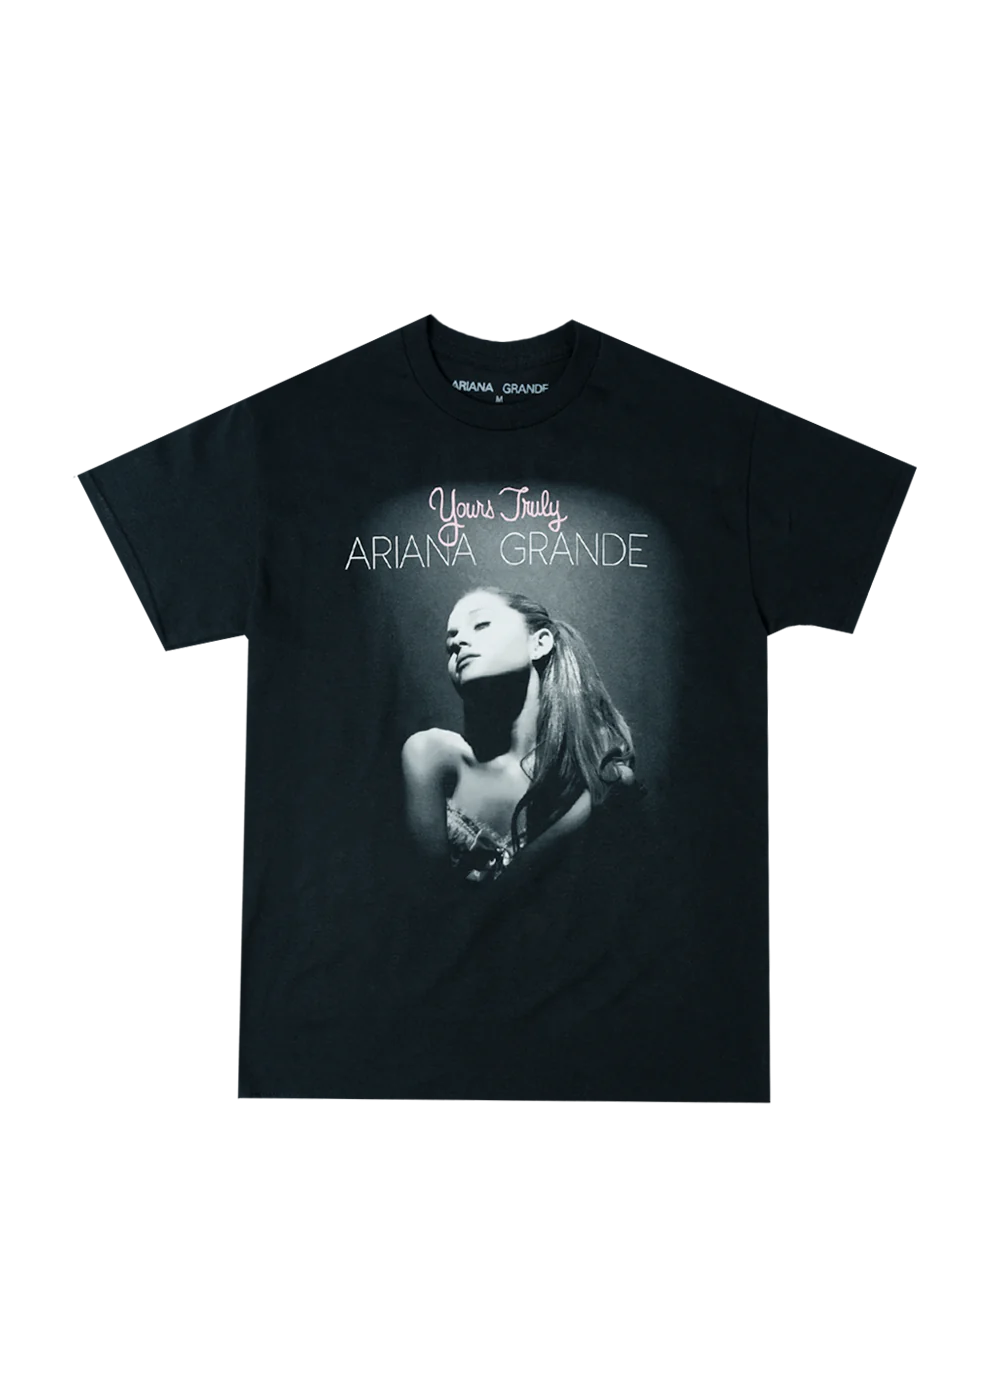 Ariana Grande - yours truly cover t-shirt